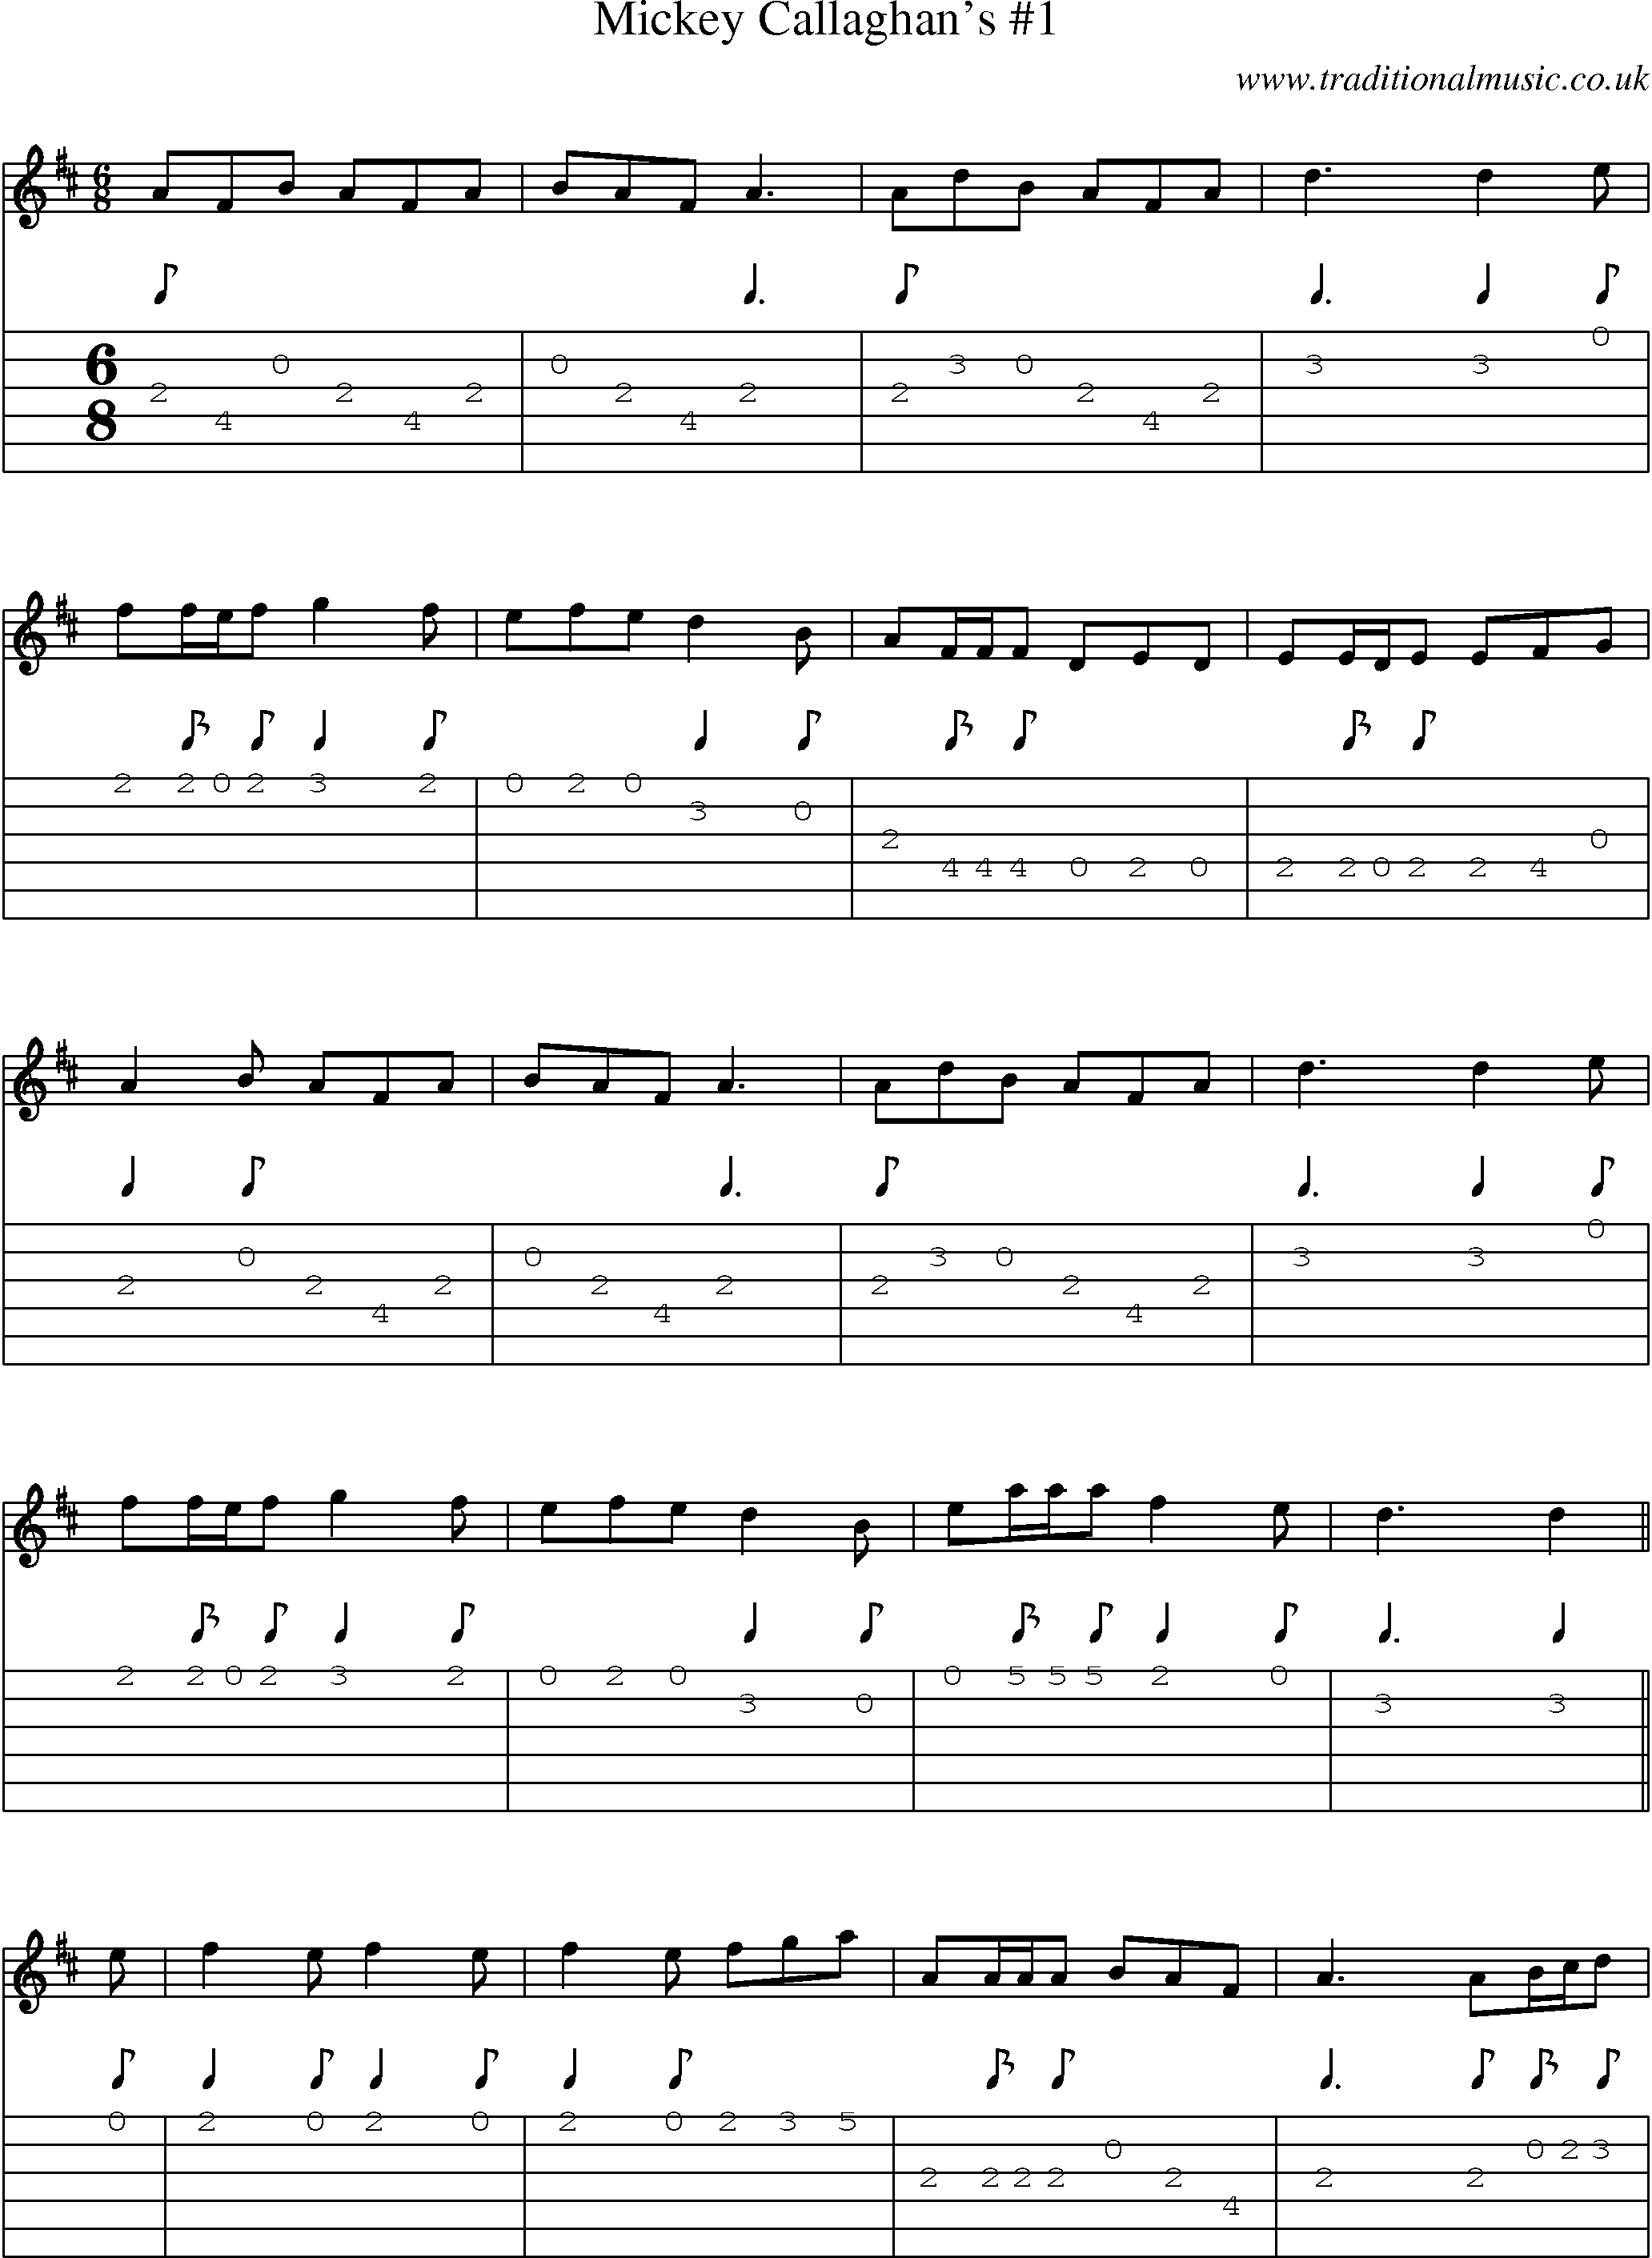 Music Score and Guitar Tabs for Mickey Callaghans 1